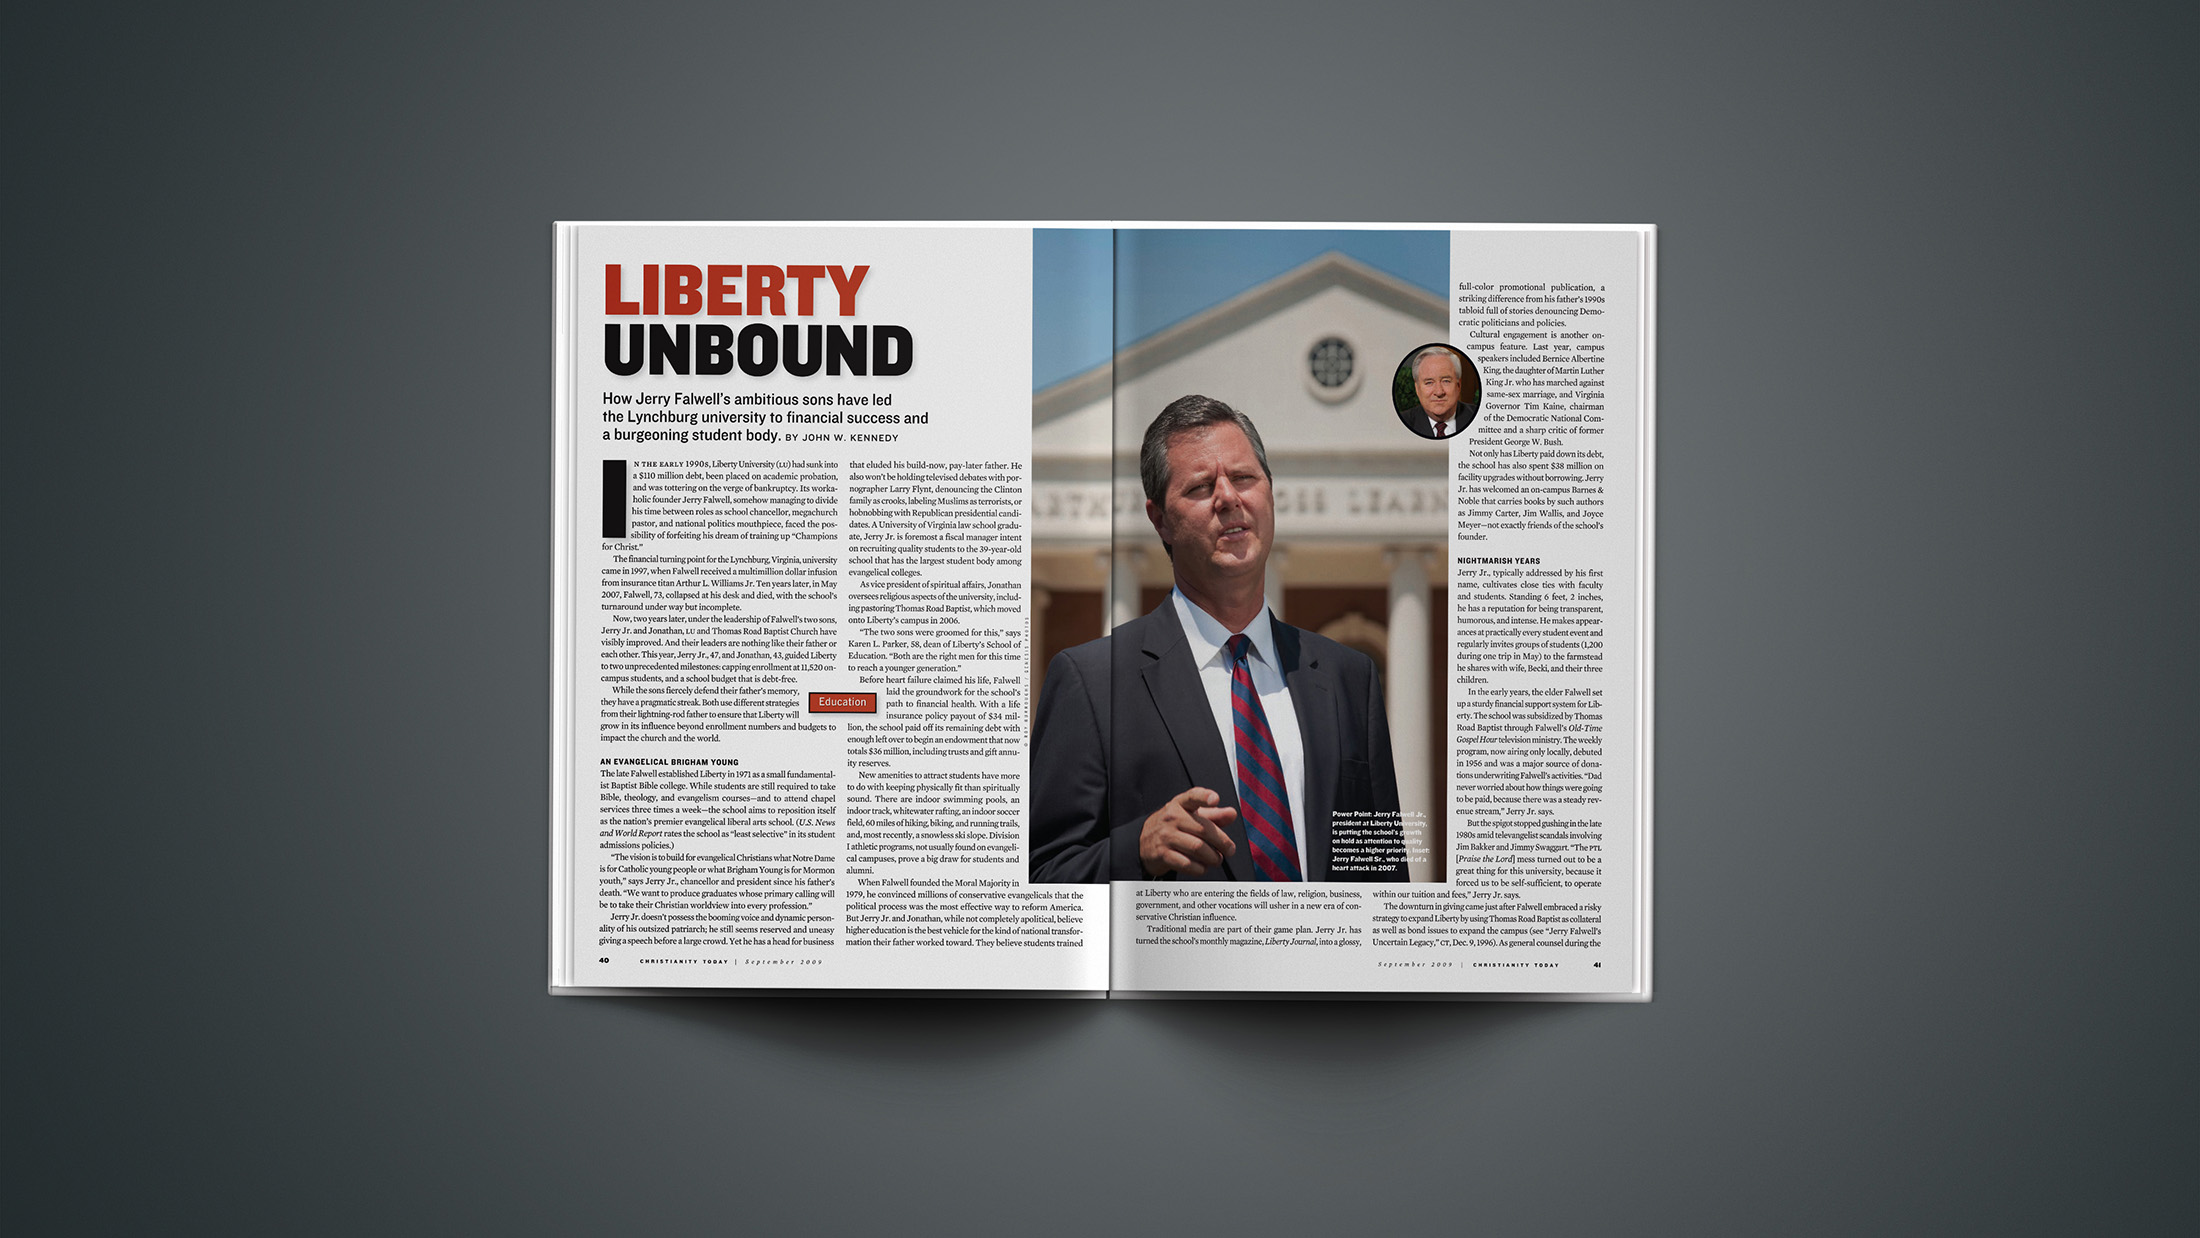 Liberty Unbound Christianity Today image